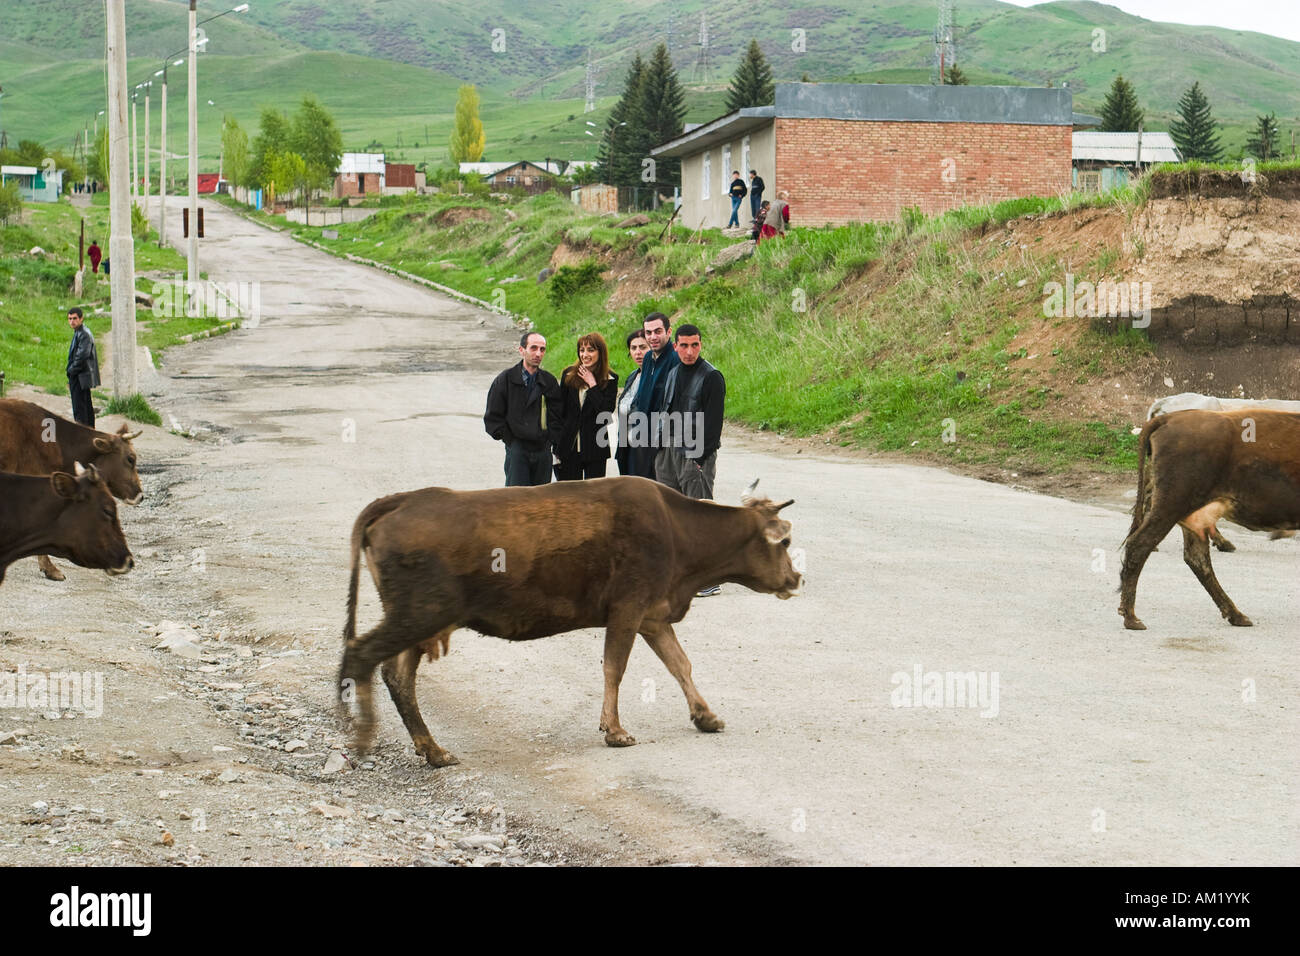 ARMENIA Vanadzor Herd of cattle walk down street in town group of adults stand in middle of road Stock Photo